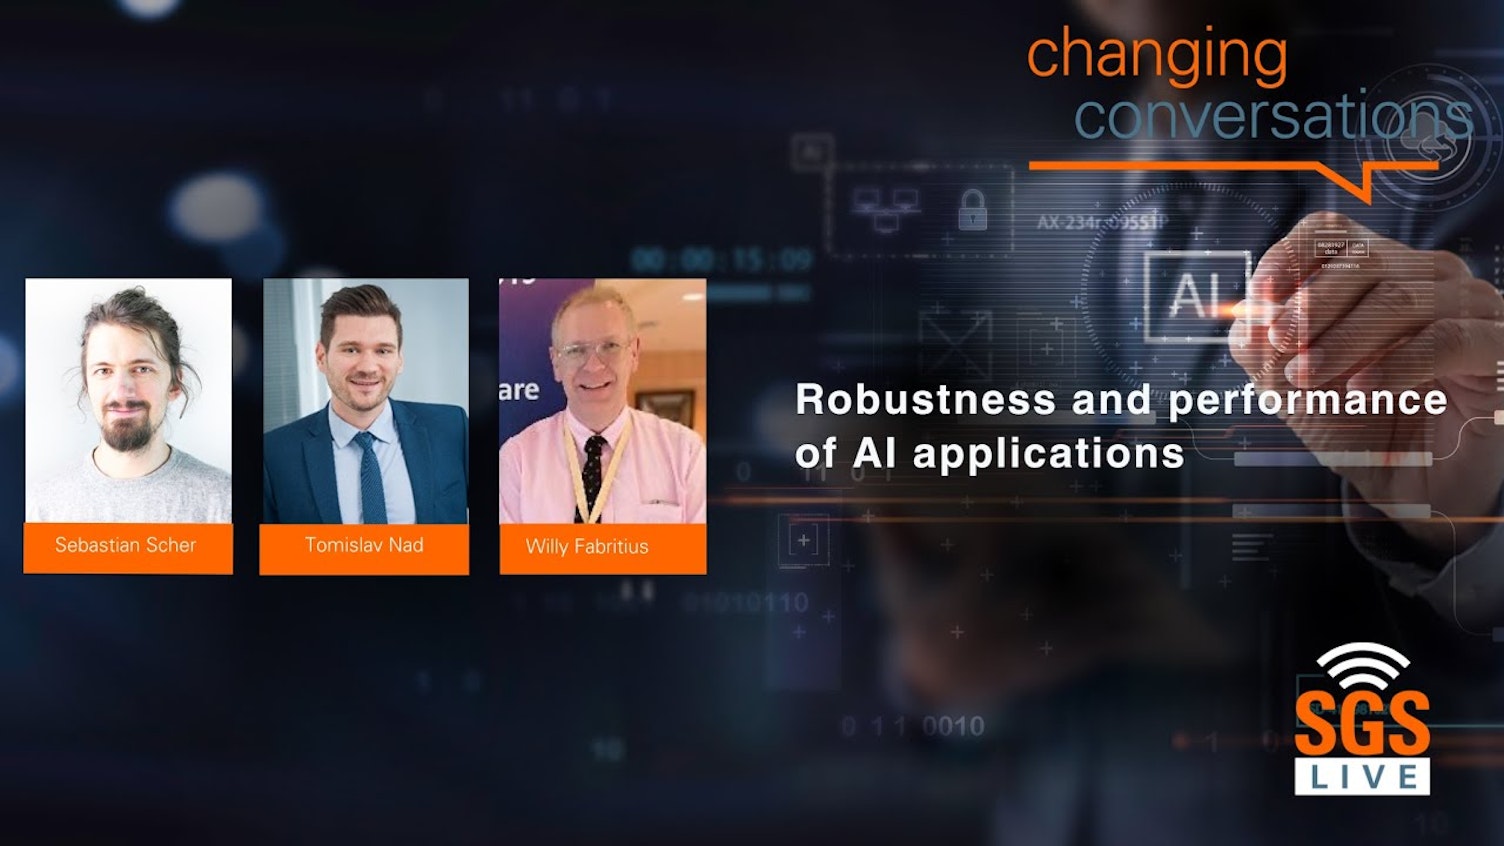 SGS Live Presents: Robustness and performance of AI applications